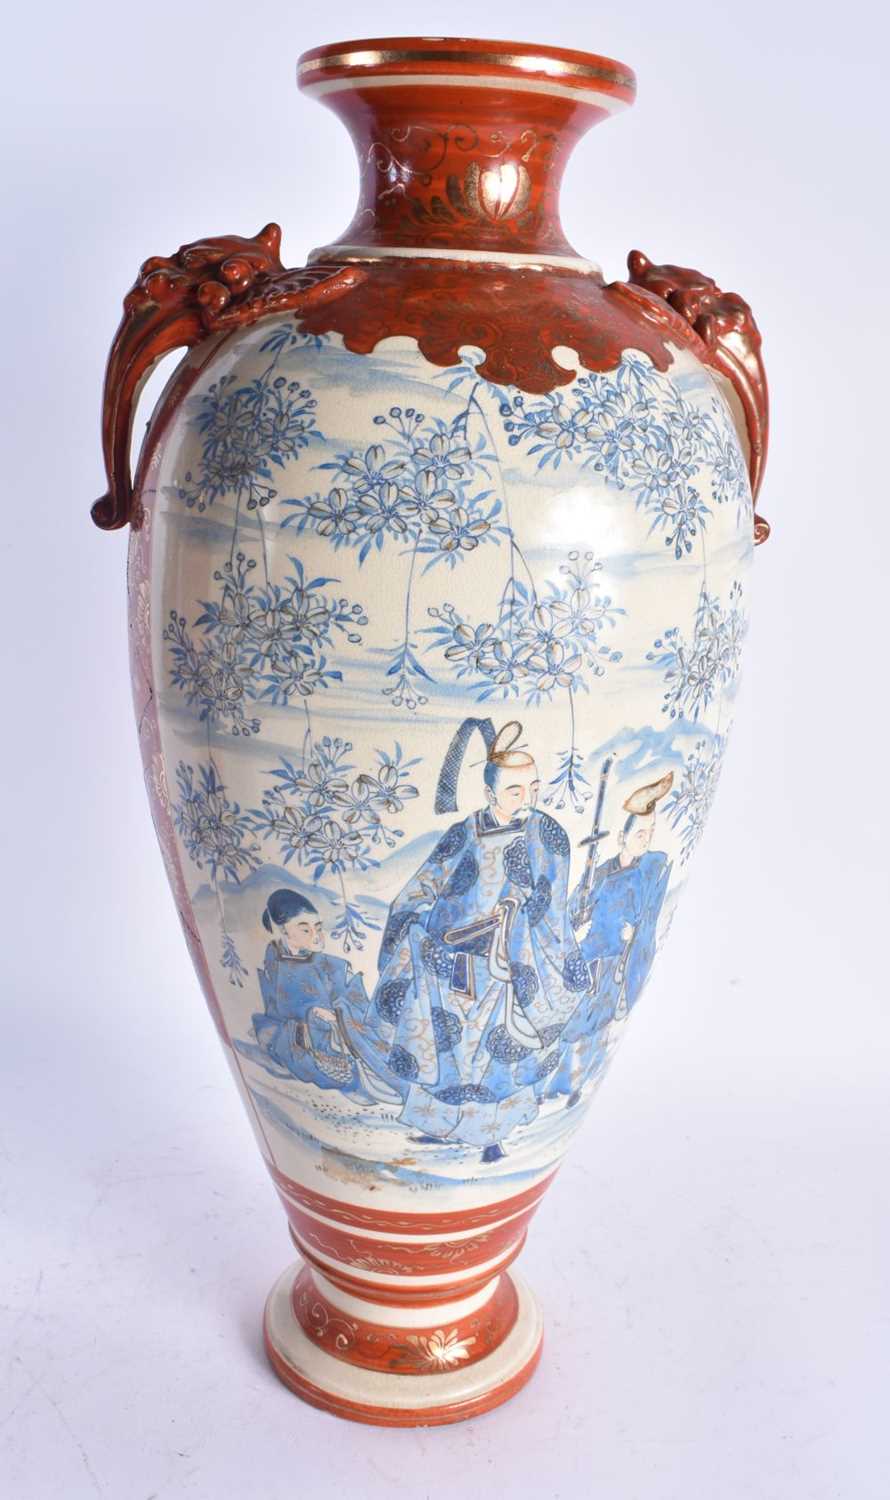 A LARGE PAIR OF 19TH CENTURY JAPANESE MEIJI PERIOD SATSUMA VASES painted with figures within - Image 6 of 6